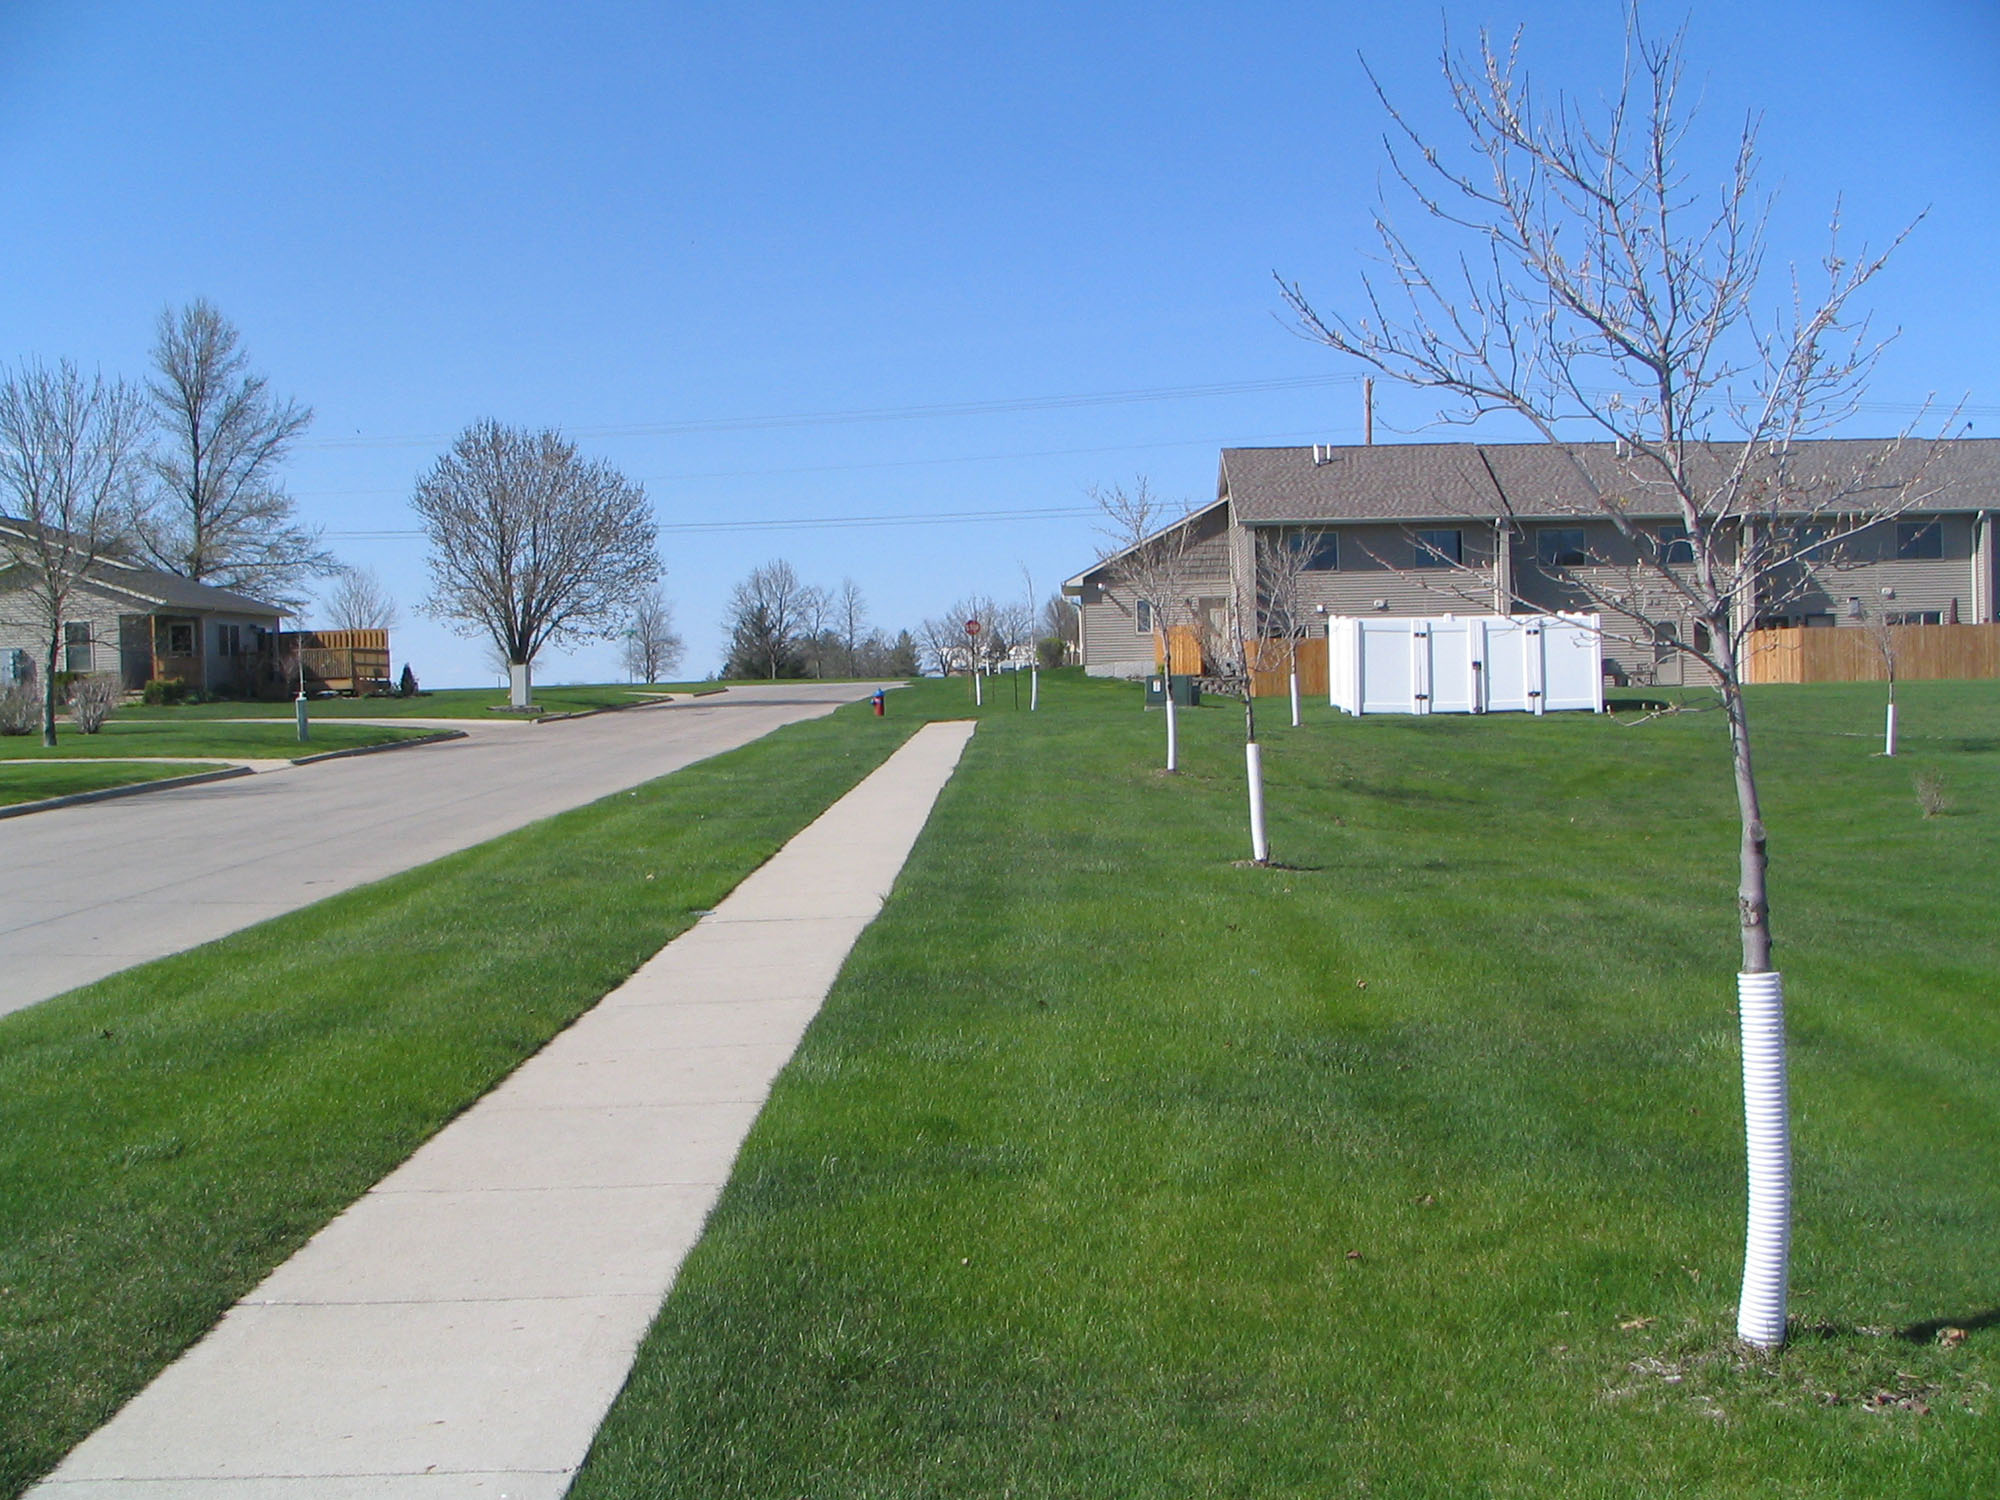 Lawn with young trees, sidewalk, and houses in the background